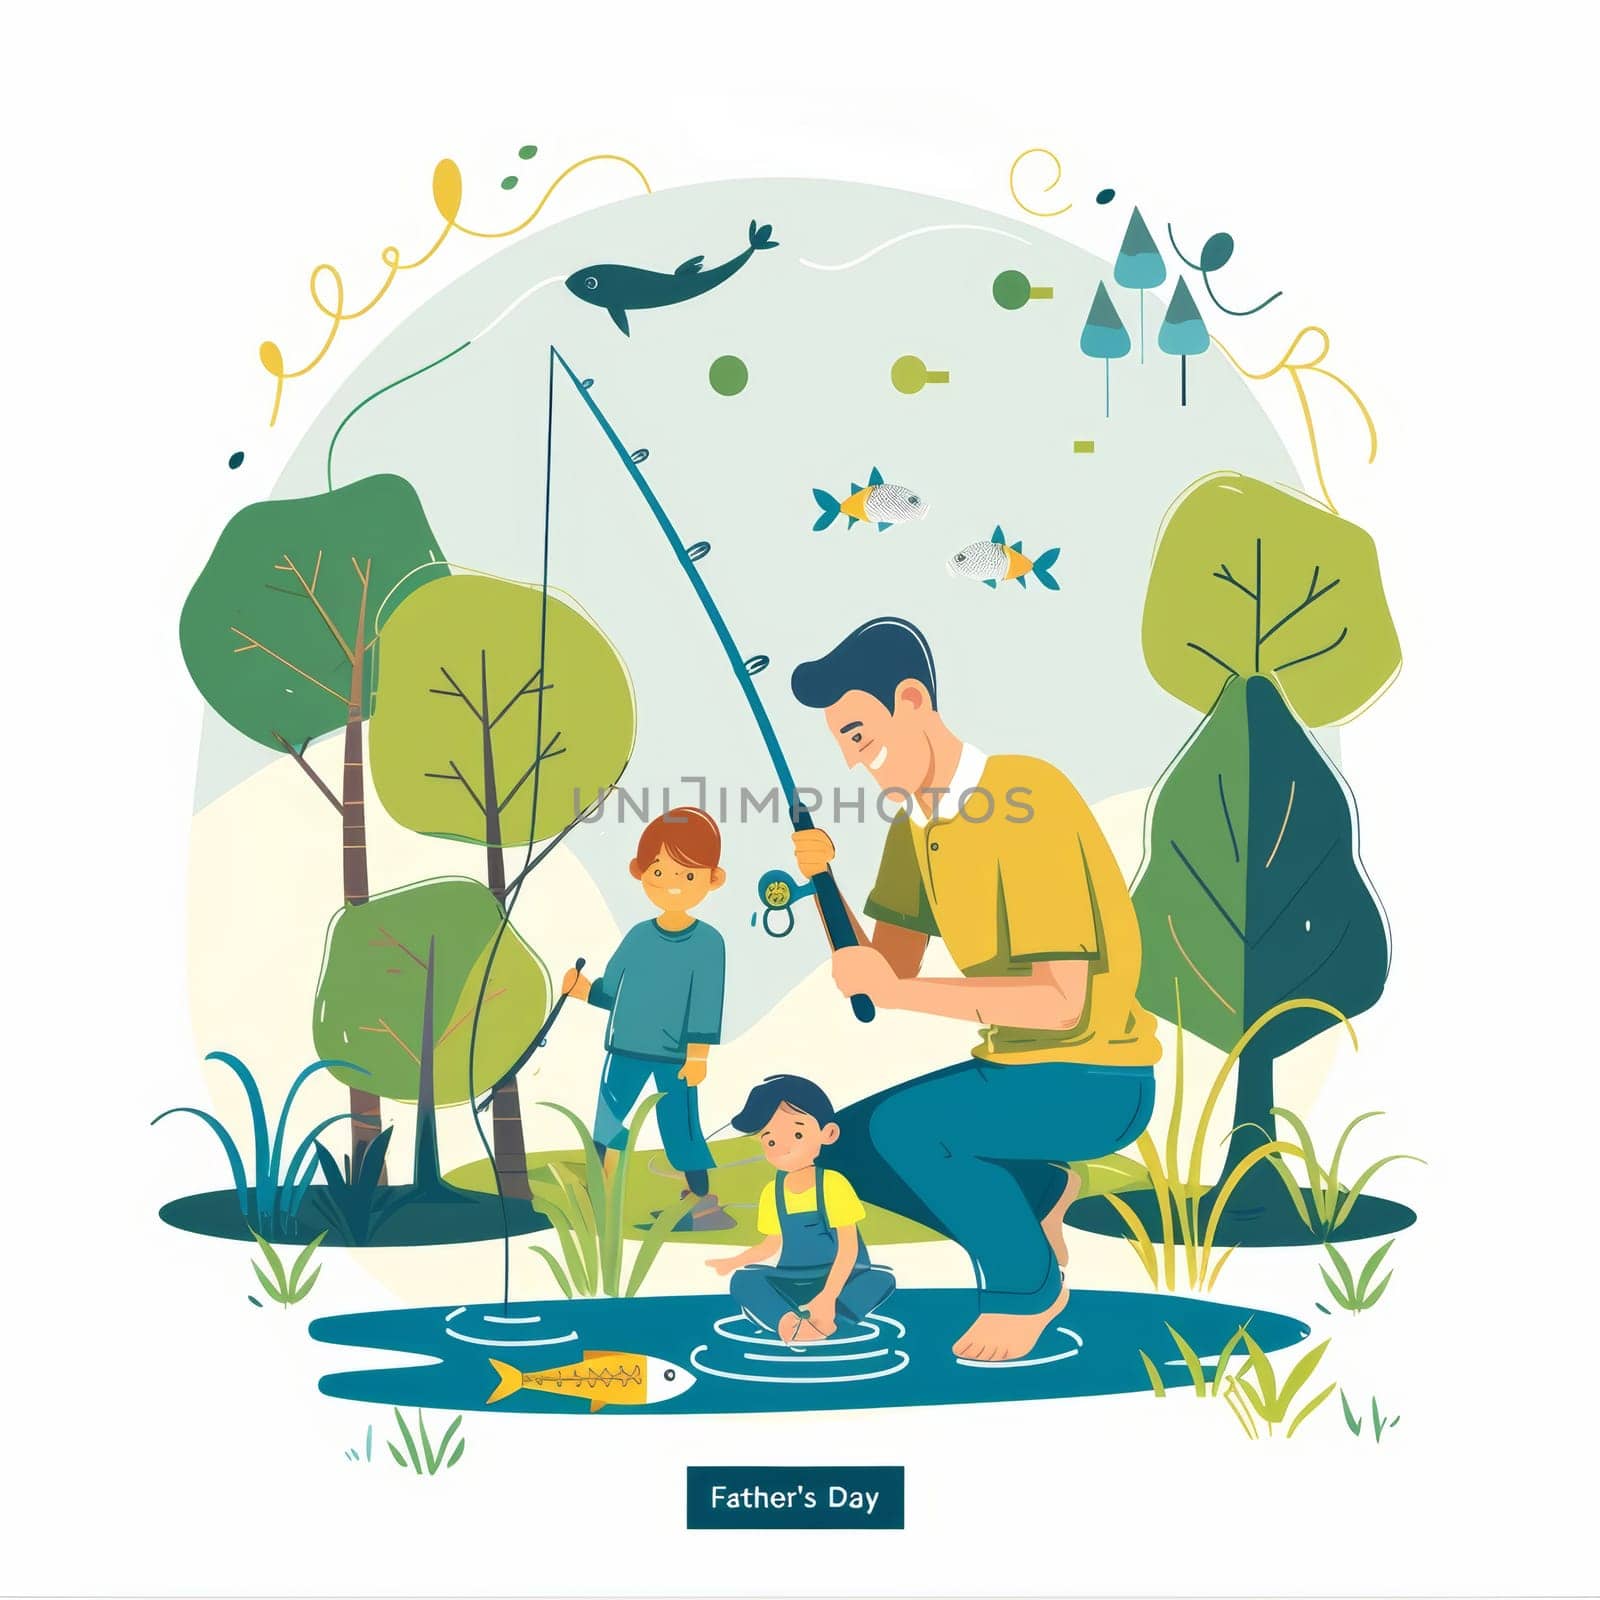 A cheerful father and his children are depicted fishing together amidst a vibrant, illustrated landscape, celebrating Fathers Day with joy